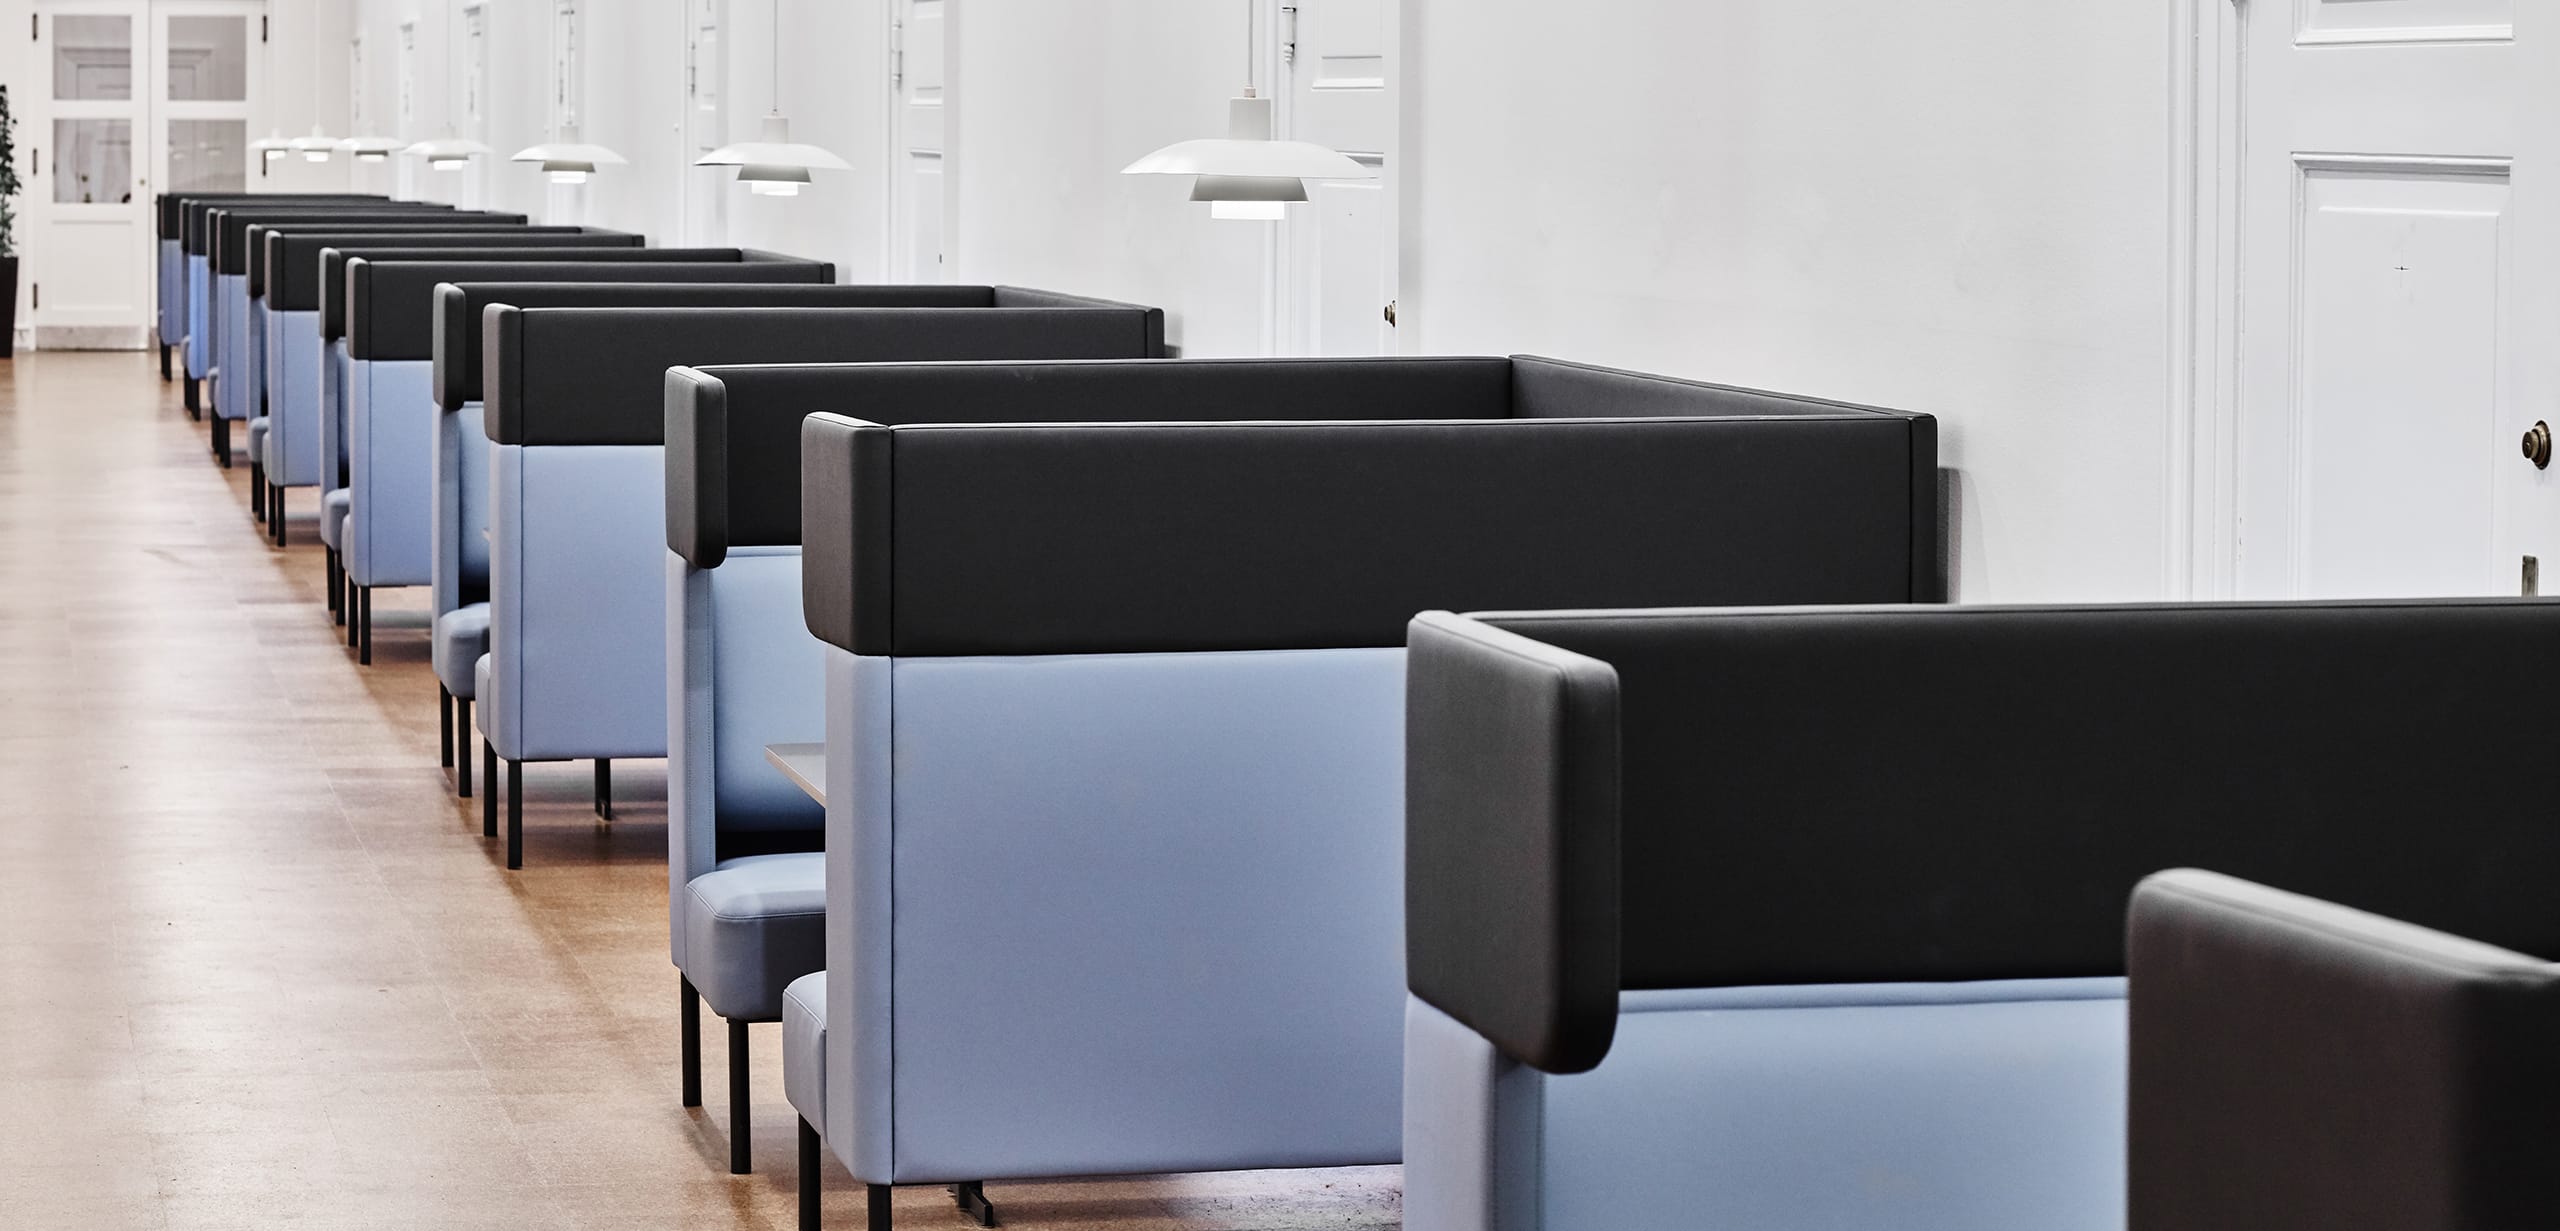 A row of blue and black office work booths in a hallway.